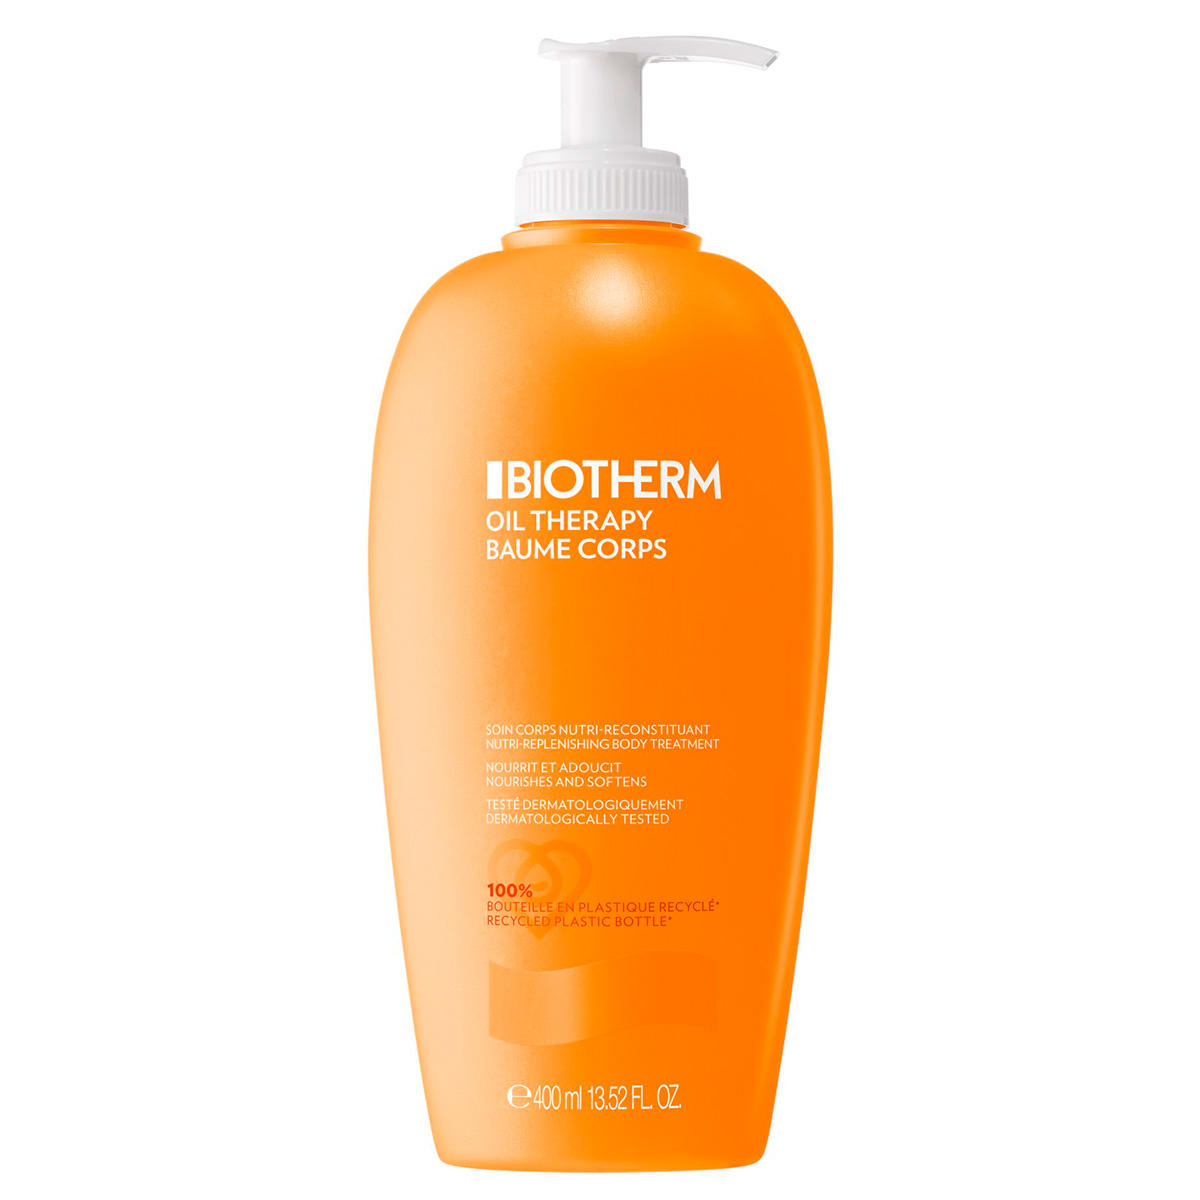 Biotherm Oil Therapy Baume Corps Lichaamsmelk 400 ml - 1